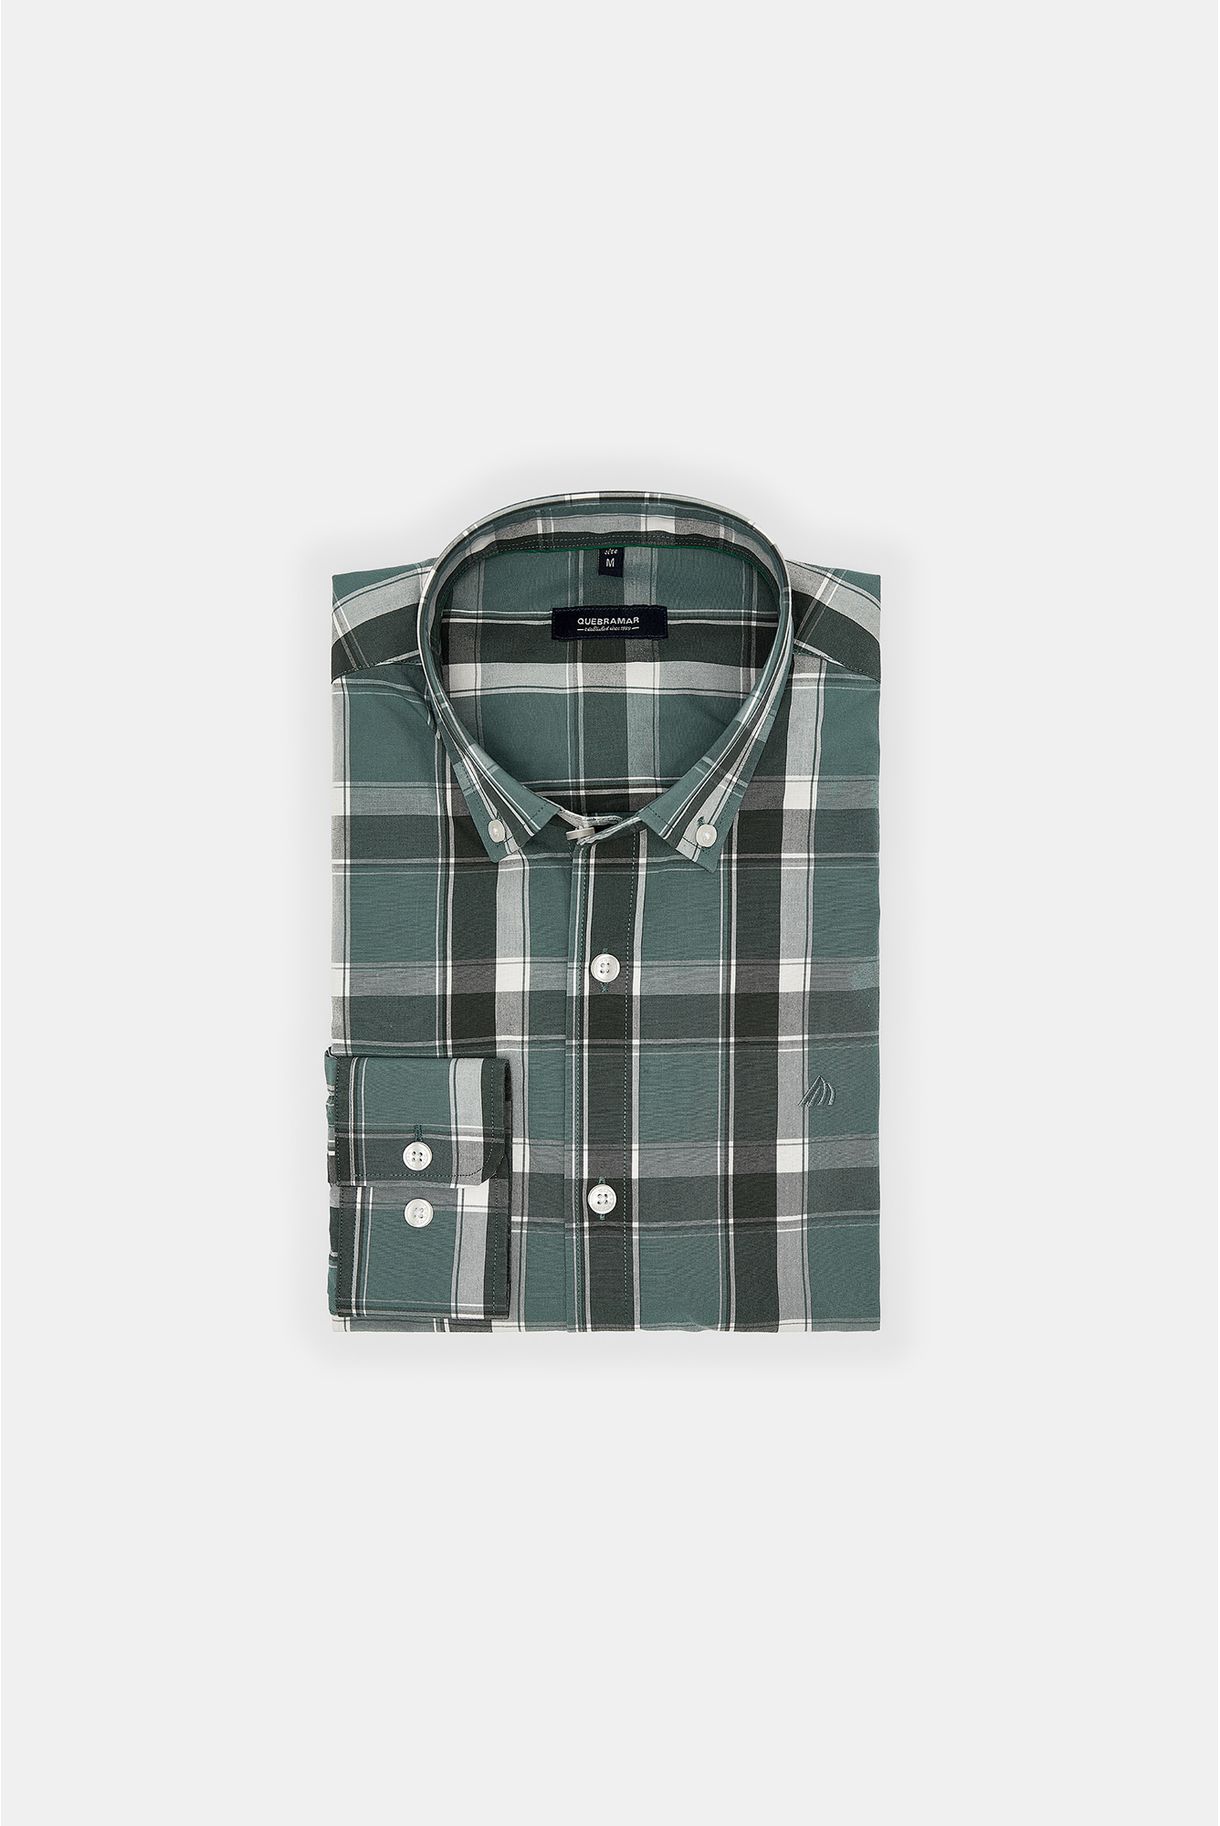 SHIRT IN SQUARES